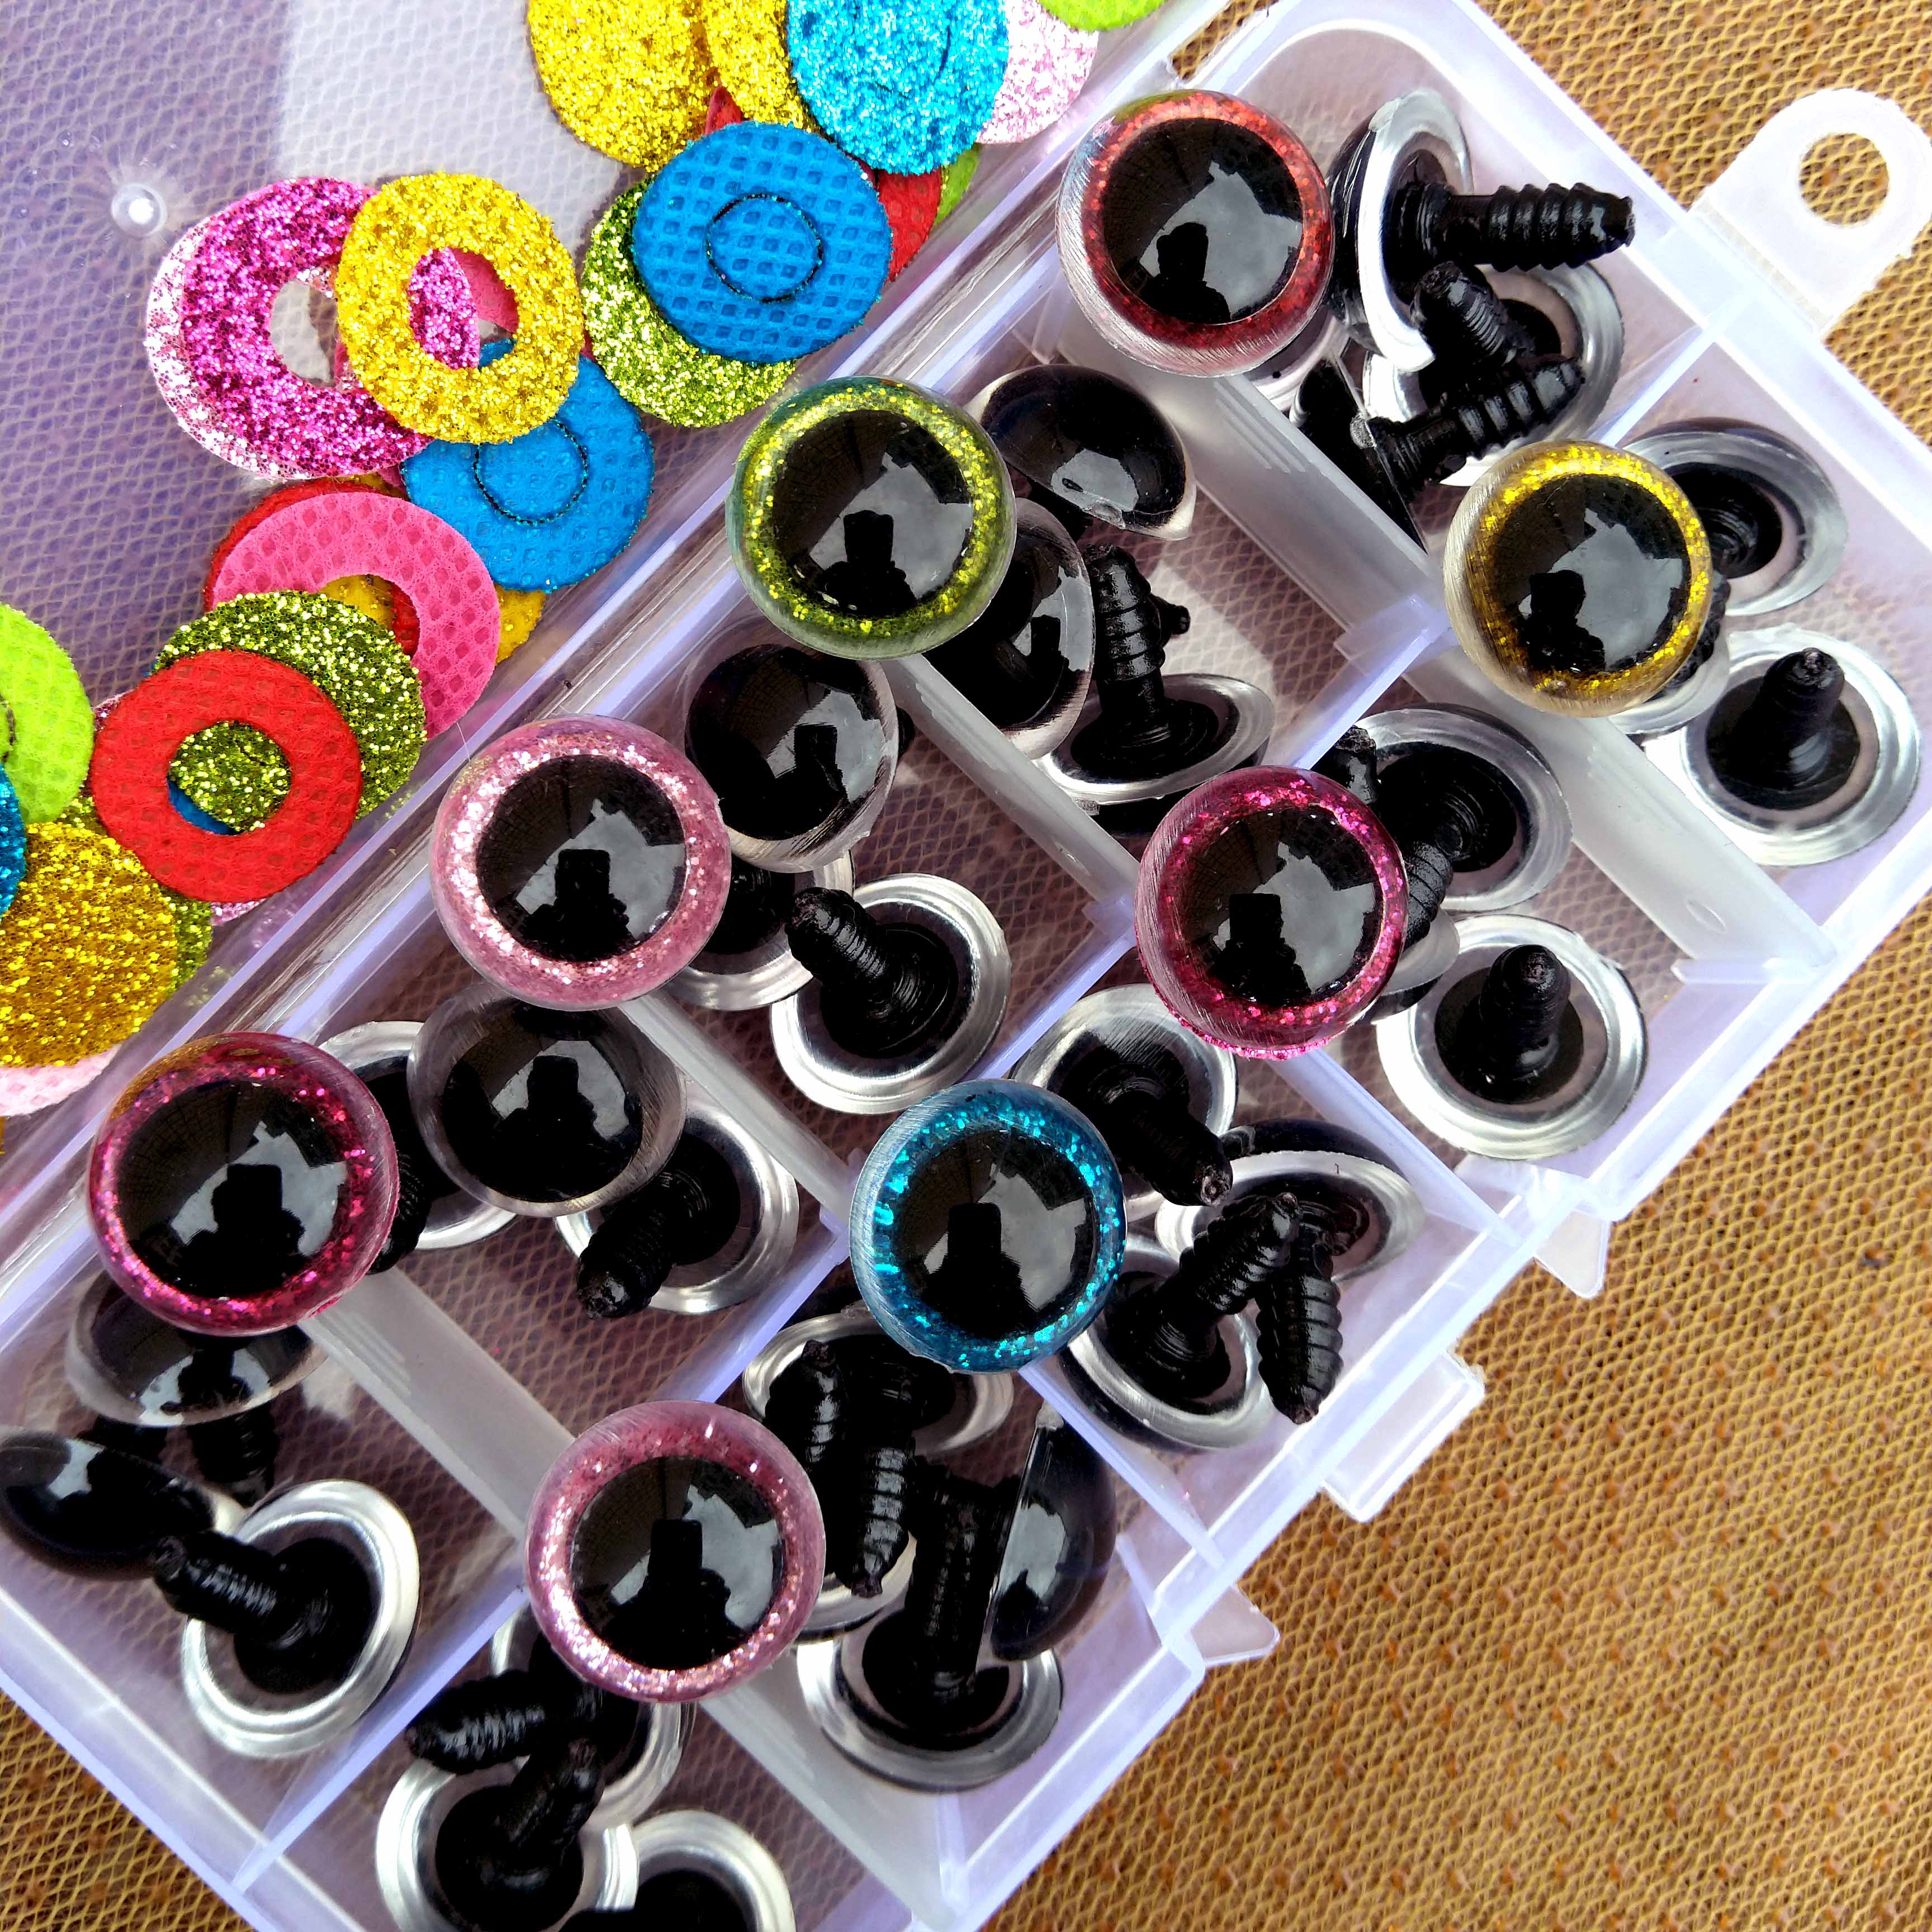 16mm Safety Plastic Colorful Doll Eyes for Crochet Stuffed Animals & Dolls - Xclusive Collectibles